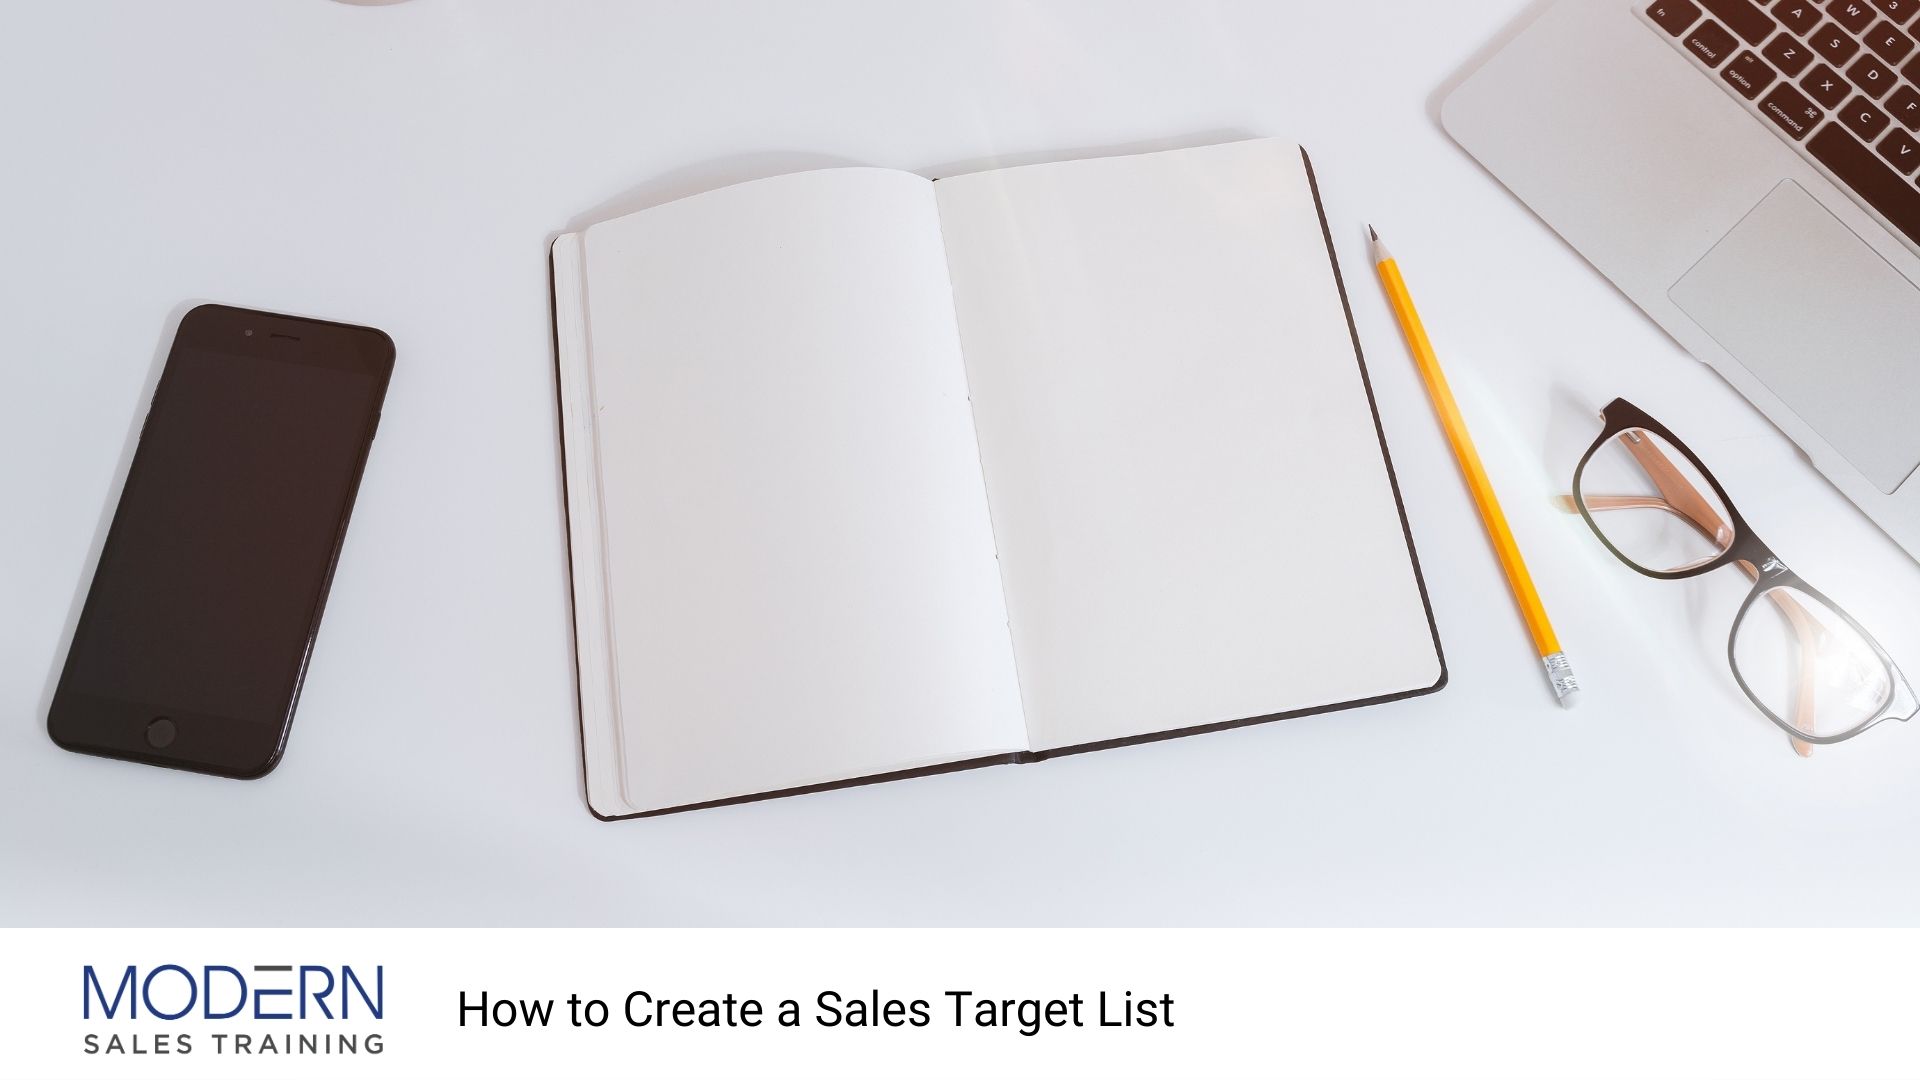 How-To-Create-a-Sales-Target-List-Sales-Training-Course-Modern-Sales-Training